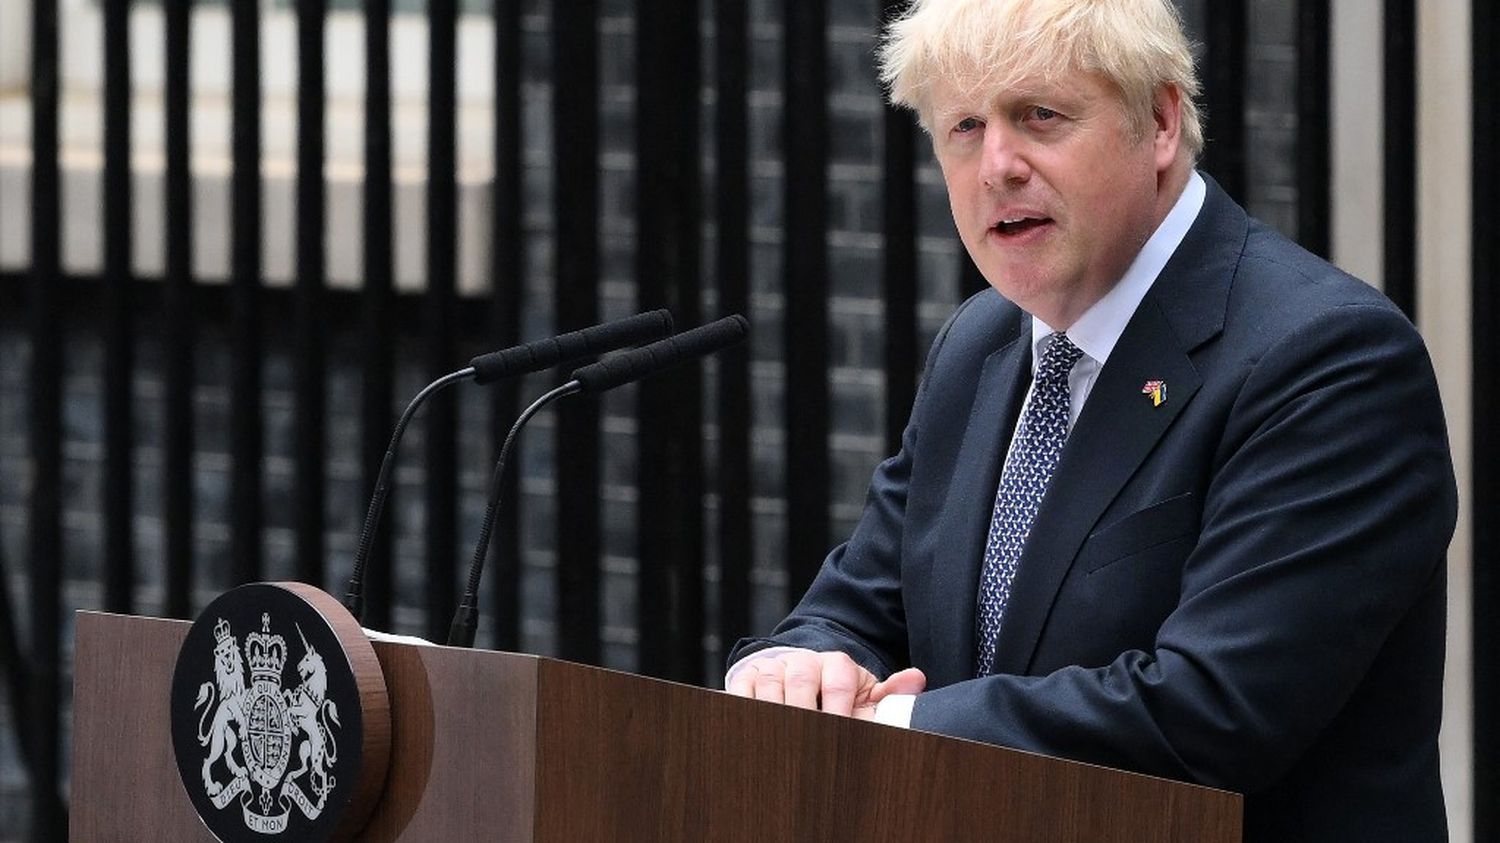 Resignation Of Boris Johnson Citing Churchill Brexit And Woke Nonsense The Contenders For The Post Of Prime Minister Are Anchored Well On The Right